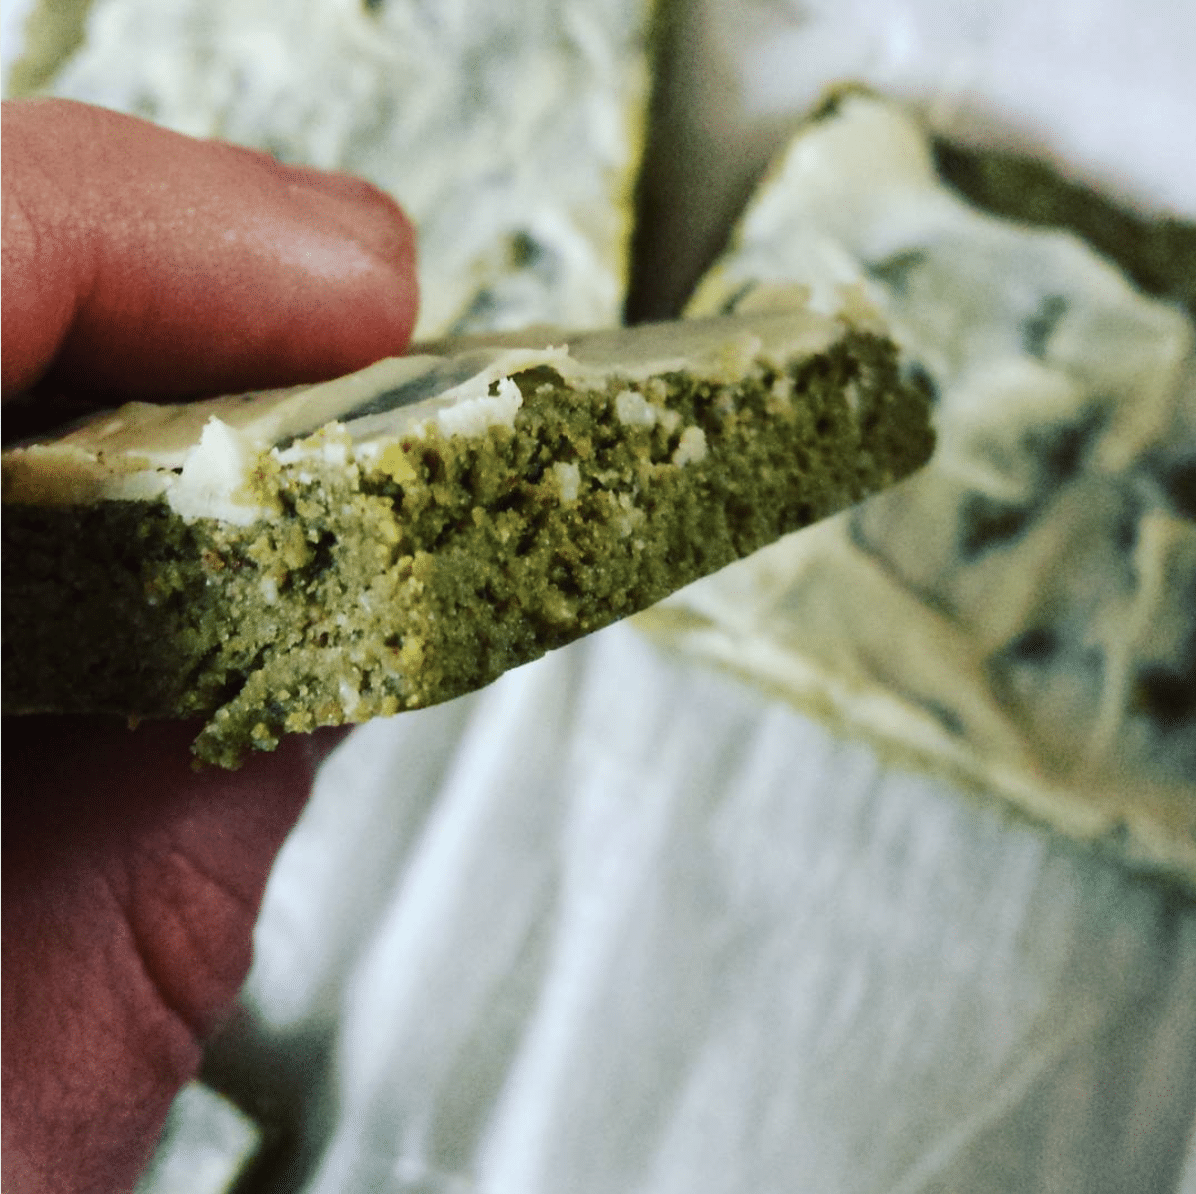 Healthy Matcha Green Tea Almond DIY Protein Bars from the DIY Protein Bars Cookbook – authored by Jessica Stier of the Desserts with Benefits Blog